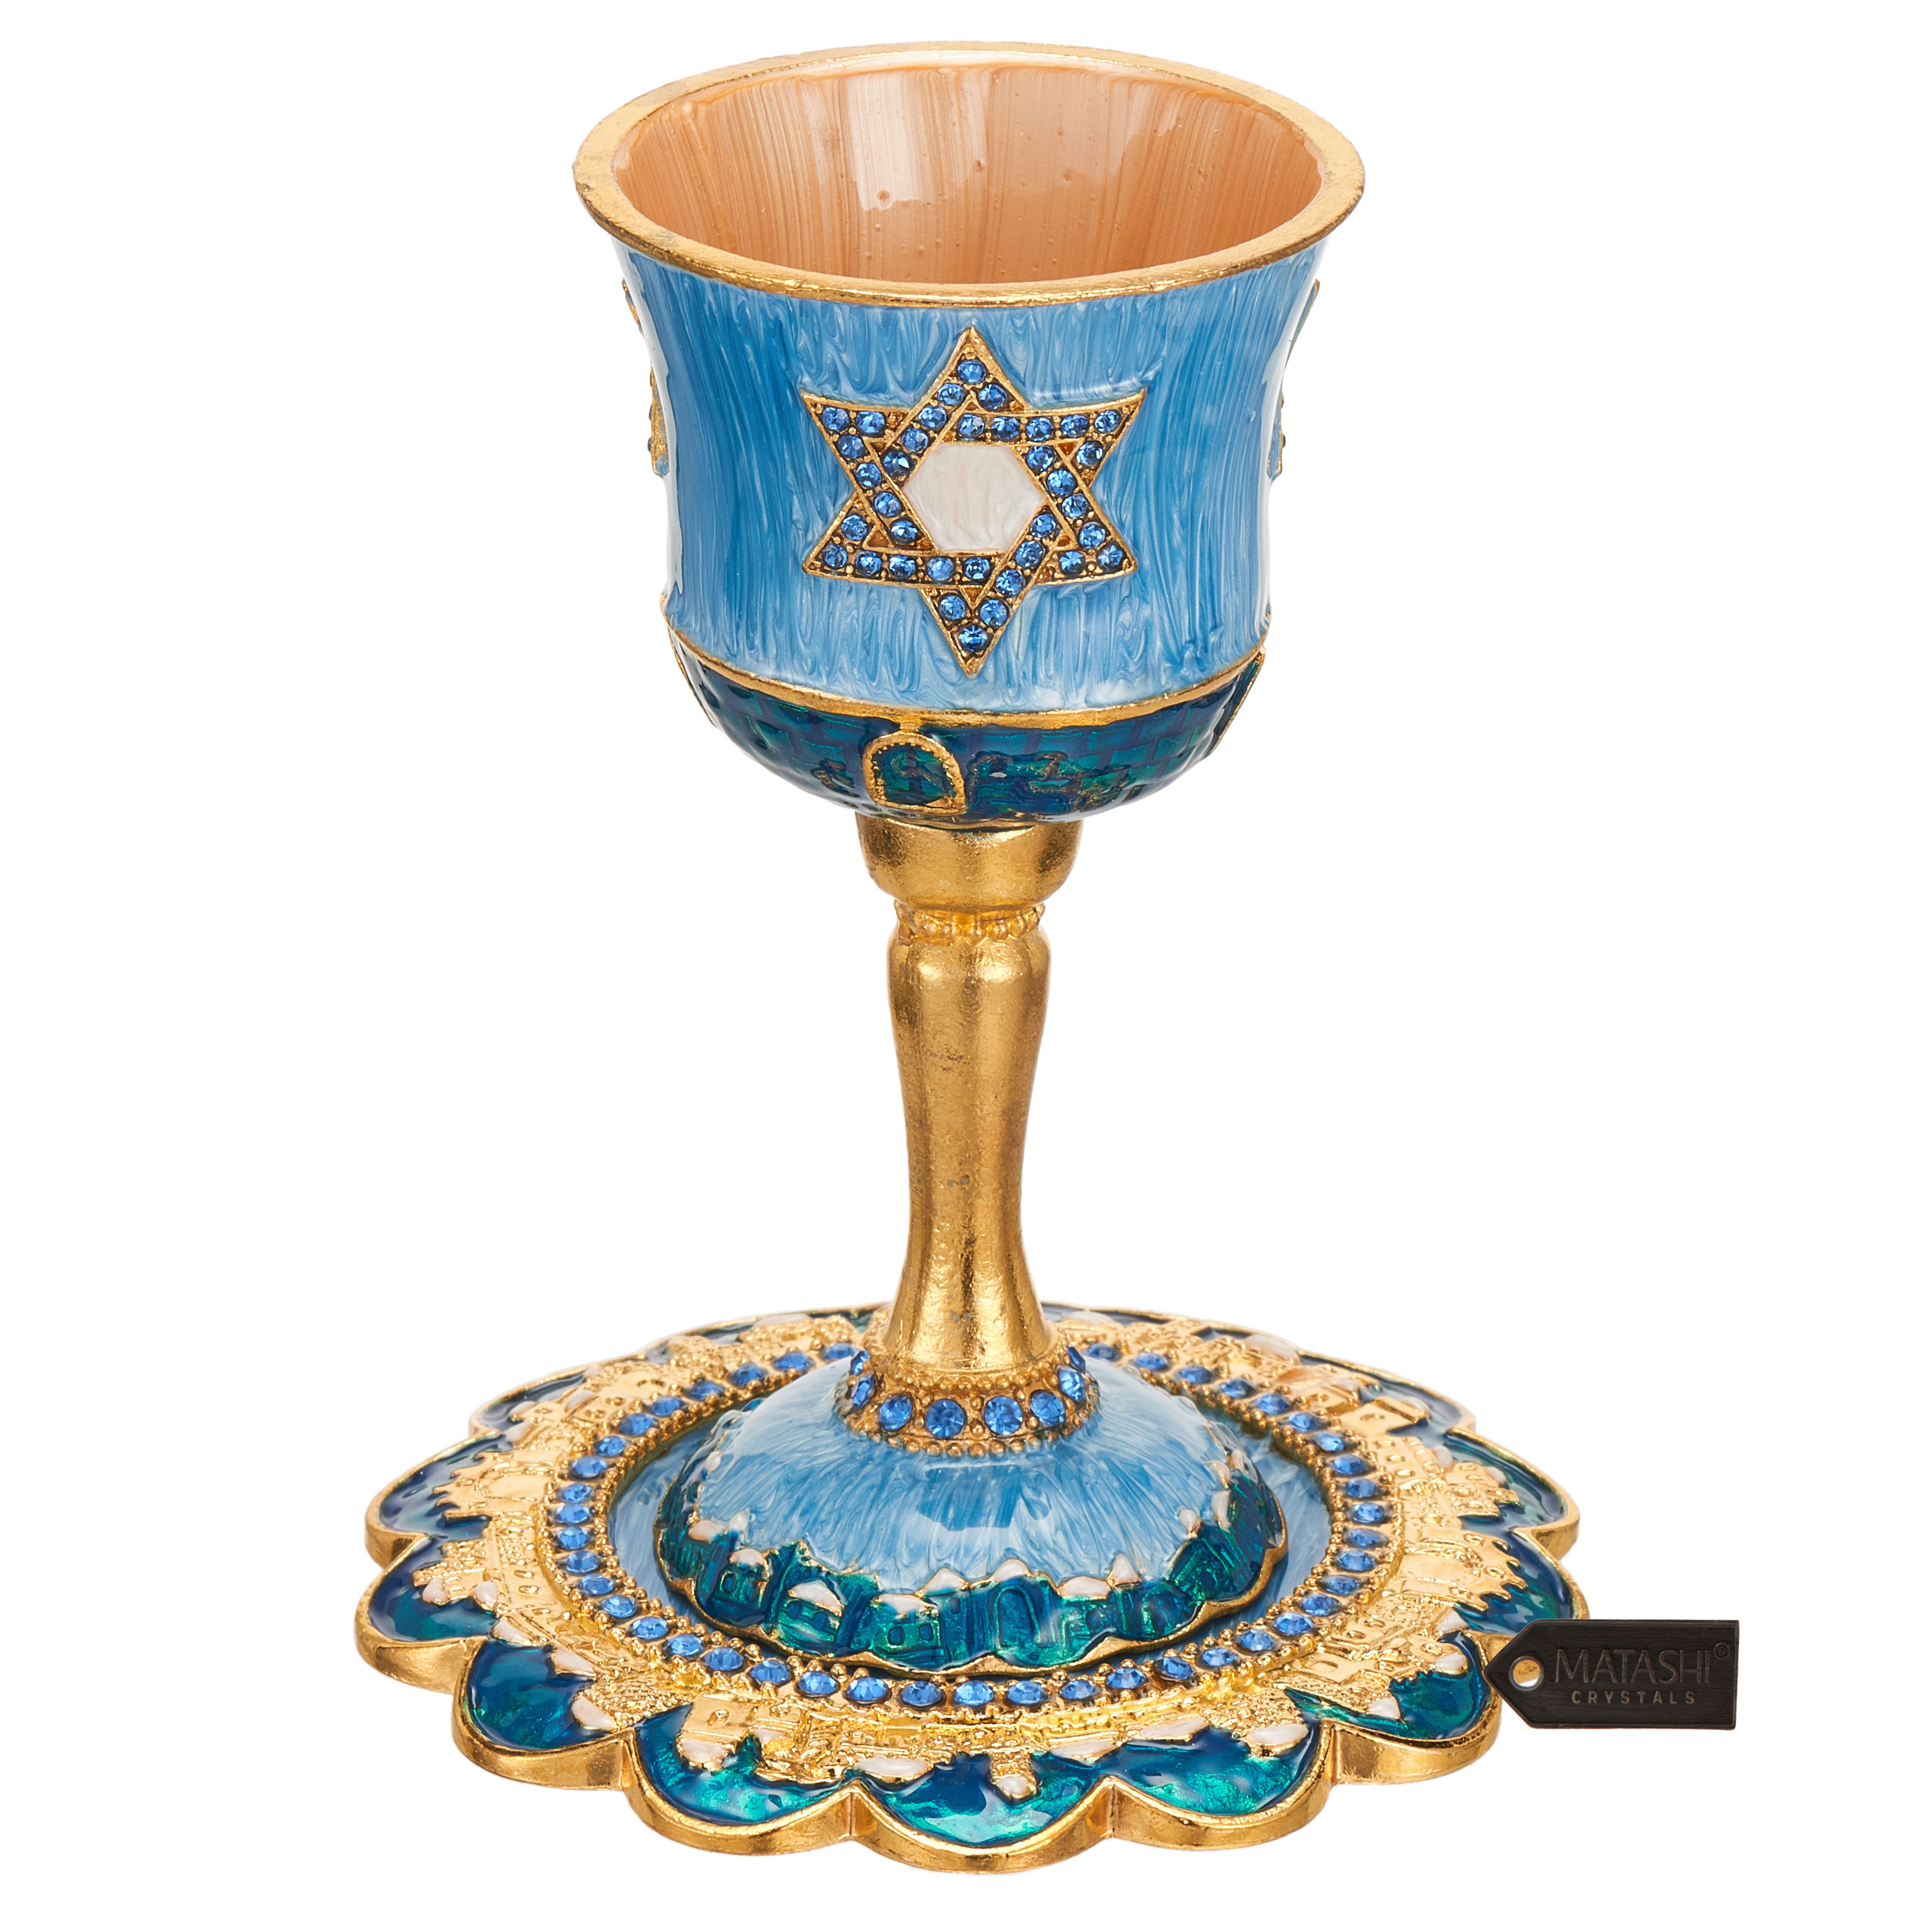 Great Gift For: Bar Mitzvah Bat Mitzvah Rosh Hashanah Chanukah Wedding Shabbat Seder Night Passover Purim and Other Jewish Holiday Jewish Beautiful 6 Shabbat Kiddush Cup/Goblet SIX Cups Size: 3.5 x Silver Plated Grapes Design